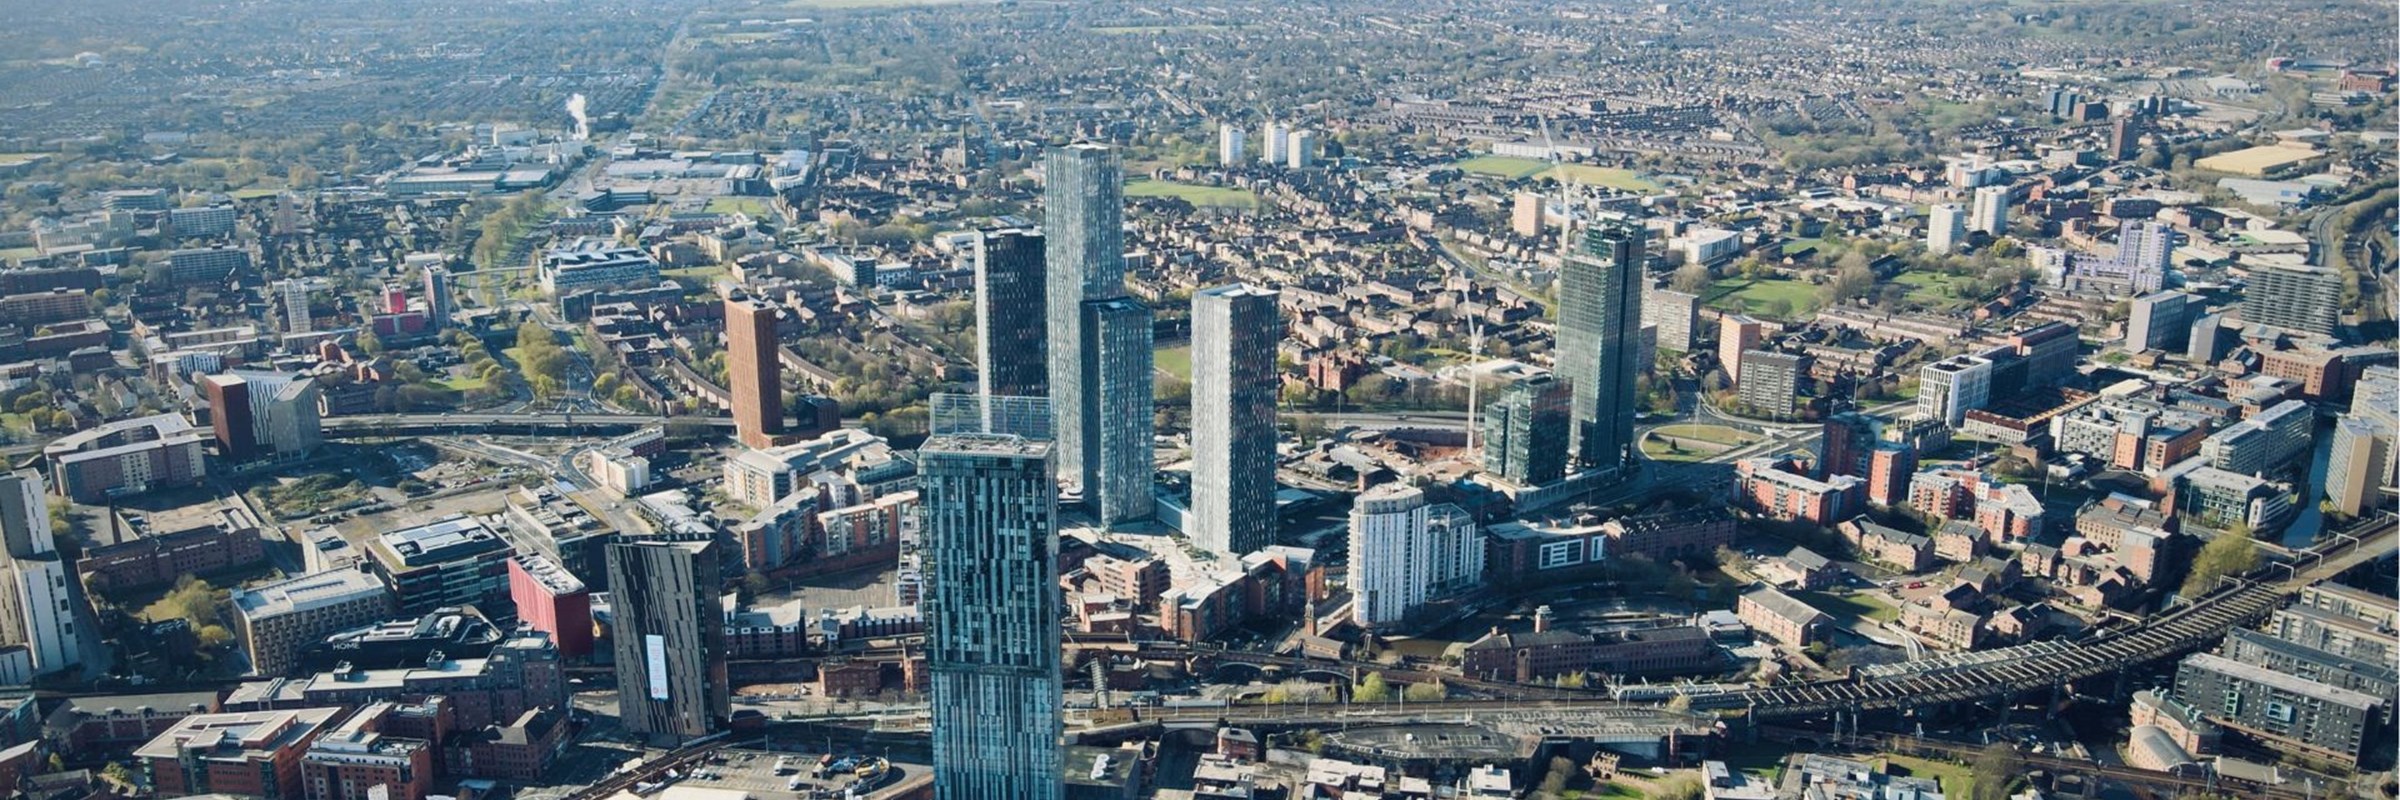 An aerial view of Manchester UK